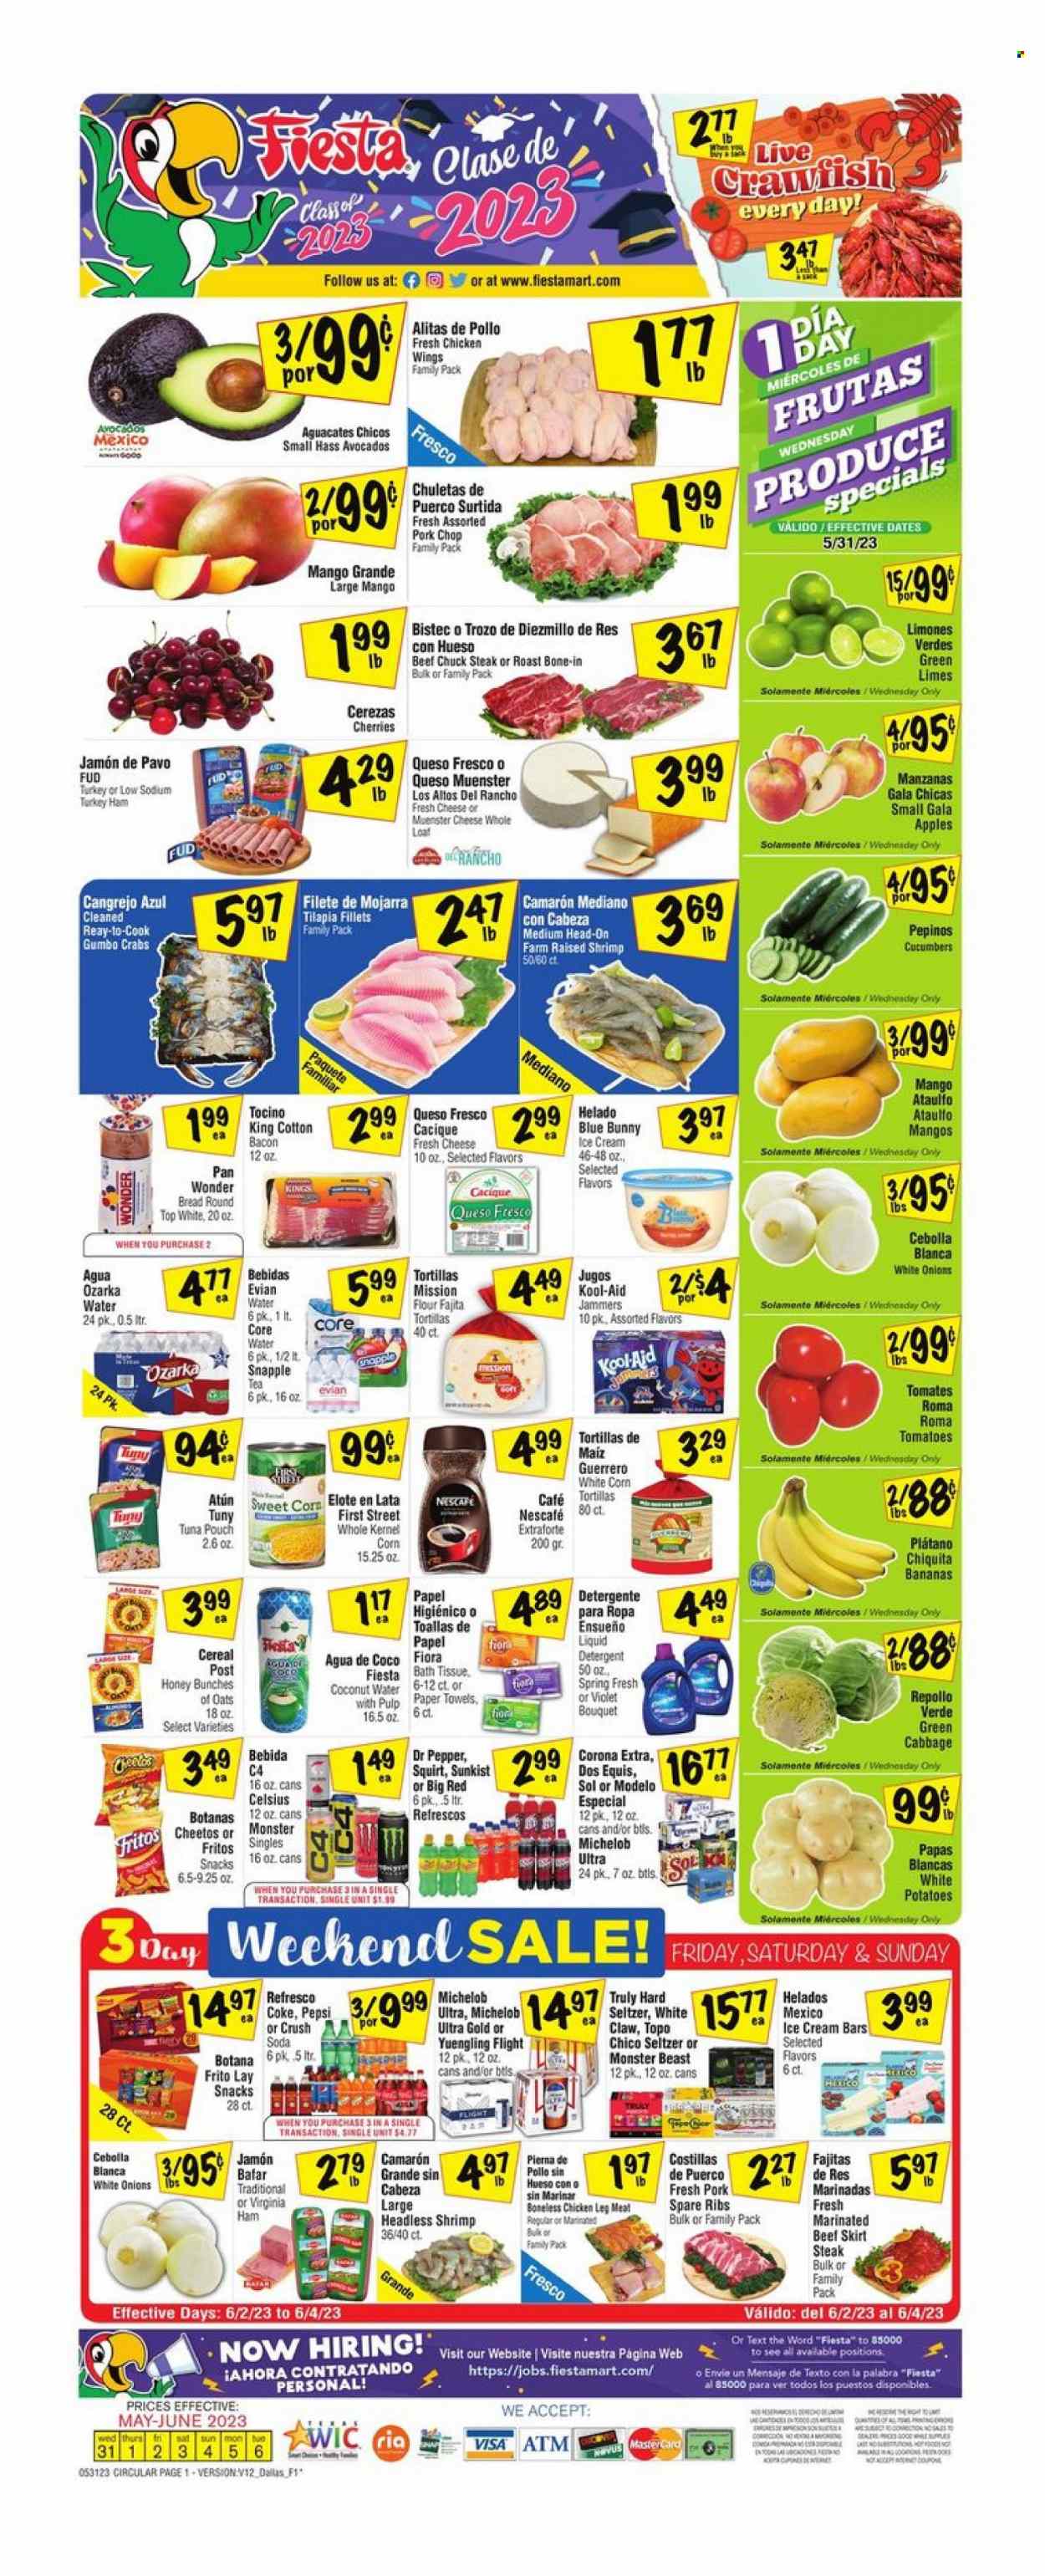 thumbnail - Fiesta Mart Flyer - 05/31/2023 - 06/06/2023 - Sales products - bread, tortillas, cabbage, corn, cucumber, tomatoes, potatoes, sweet corn, apples, avocado, Gala, limes, mango, cherries, coconut, tilapia, tuna, crab, shrimps, fajita, roast, bacon, ham, snack, virginia ham, queso fresco, Münster cheese, ice cream, ice cream bars, Blue Bunny, crawfish, chicken wings, Fritos, Cheetos, salty snack, cereals, Coca-Cola, Pepsi, Monster, Dr. Pepper, soft drink, Snapple, Coke, soda, sparkling water, Evian, water, powder drink, tea, Nescafé, White Claw, Hard Seltzer, TRULY, beer, Corona Extra, Sol, Modelo, Topo Chico, chicken legs, chicken, turkey, beef meat, steak, chuck steak, ribs, pork chops, pork meat, pork ribs, pork spare ribs, bath tissue, kitchen towels, paper towels, detergent, liquid detergent, Dos Equis, Yuengling, Michelob. Page 1.